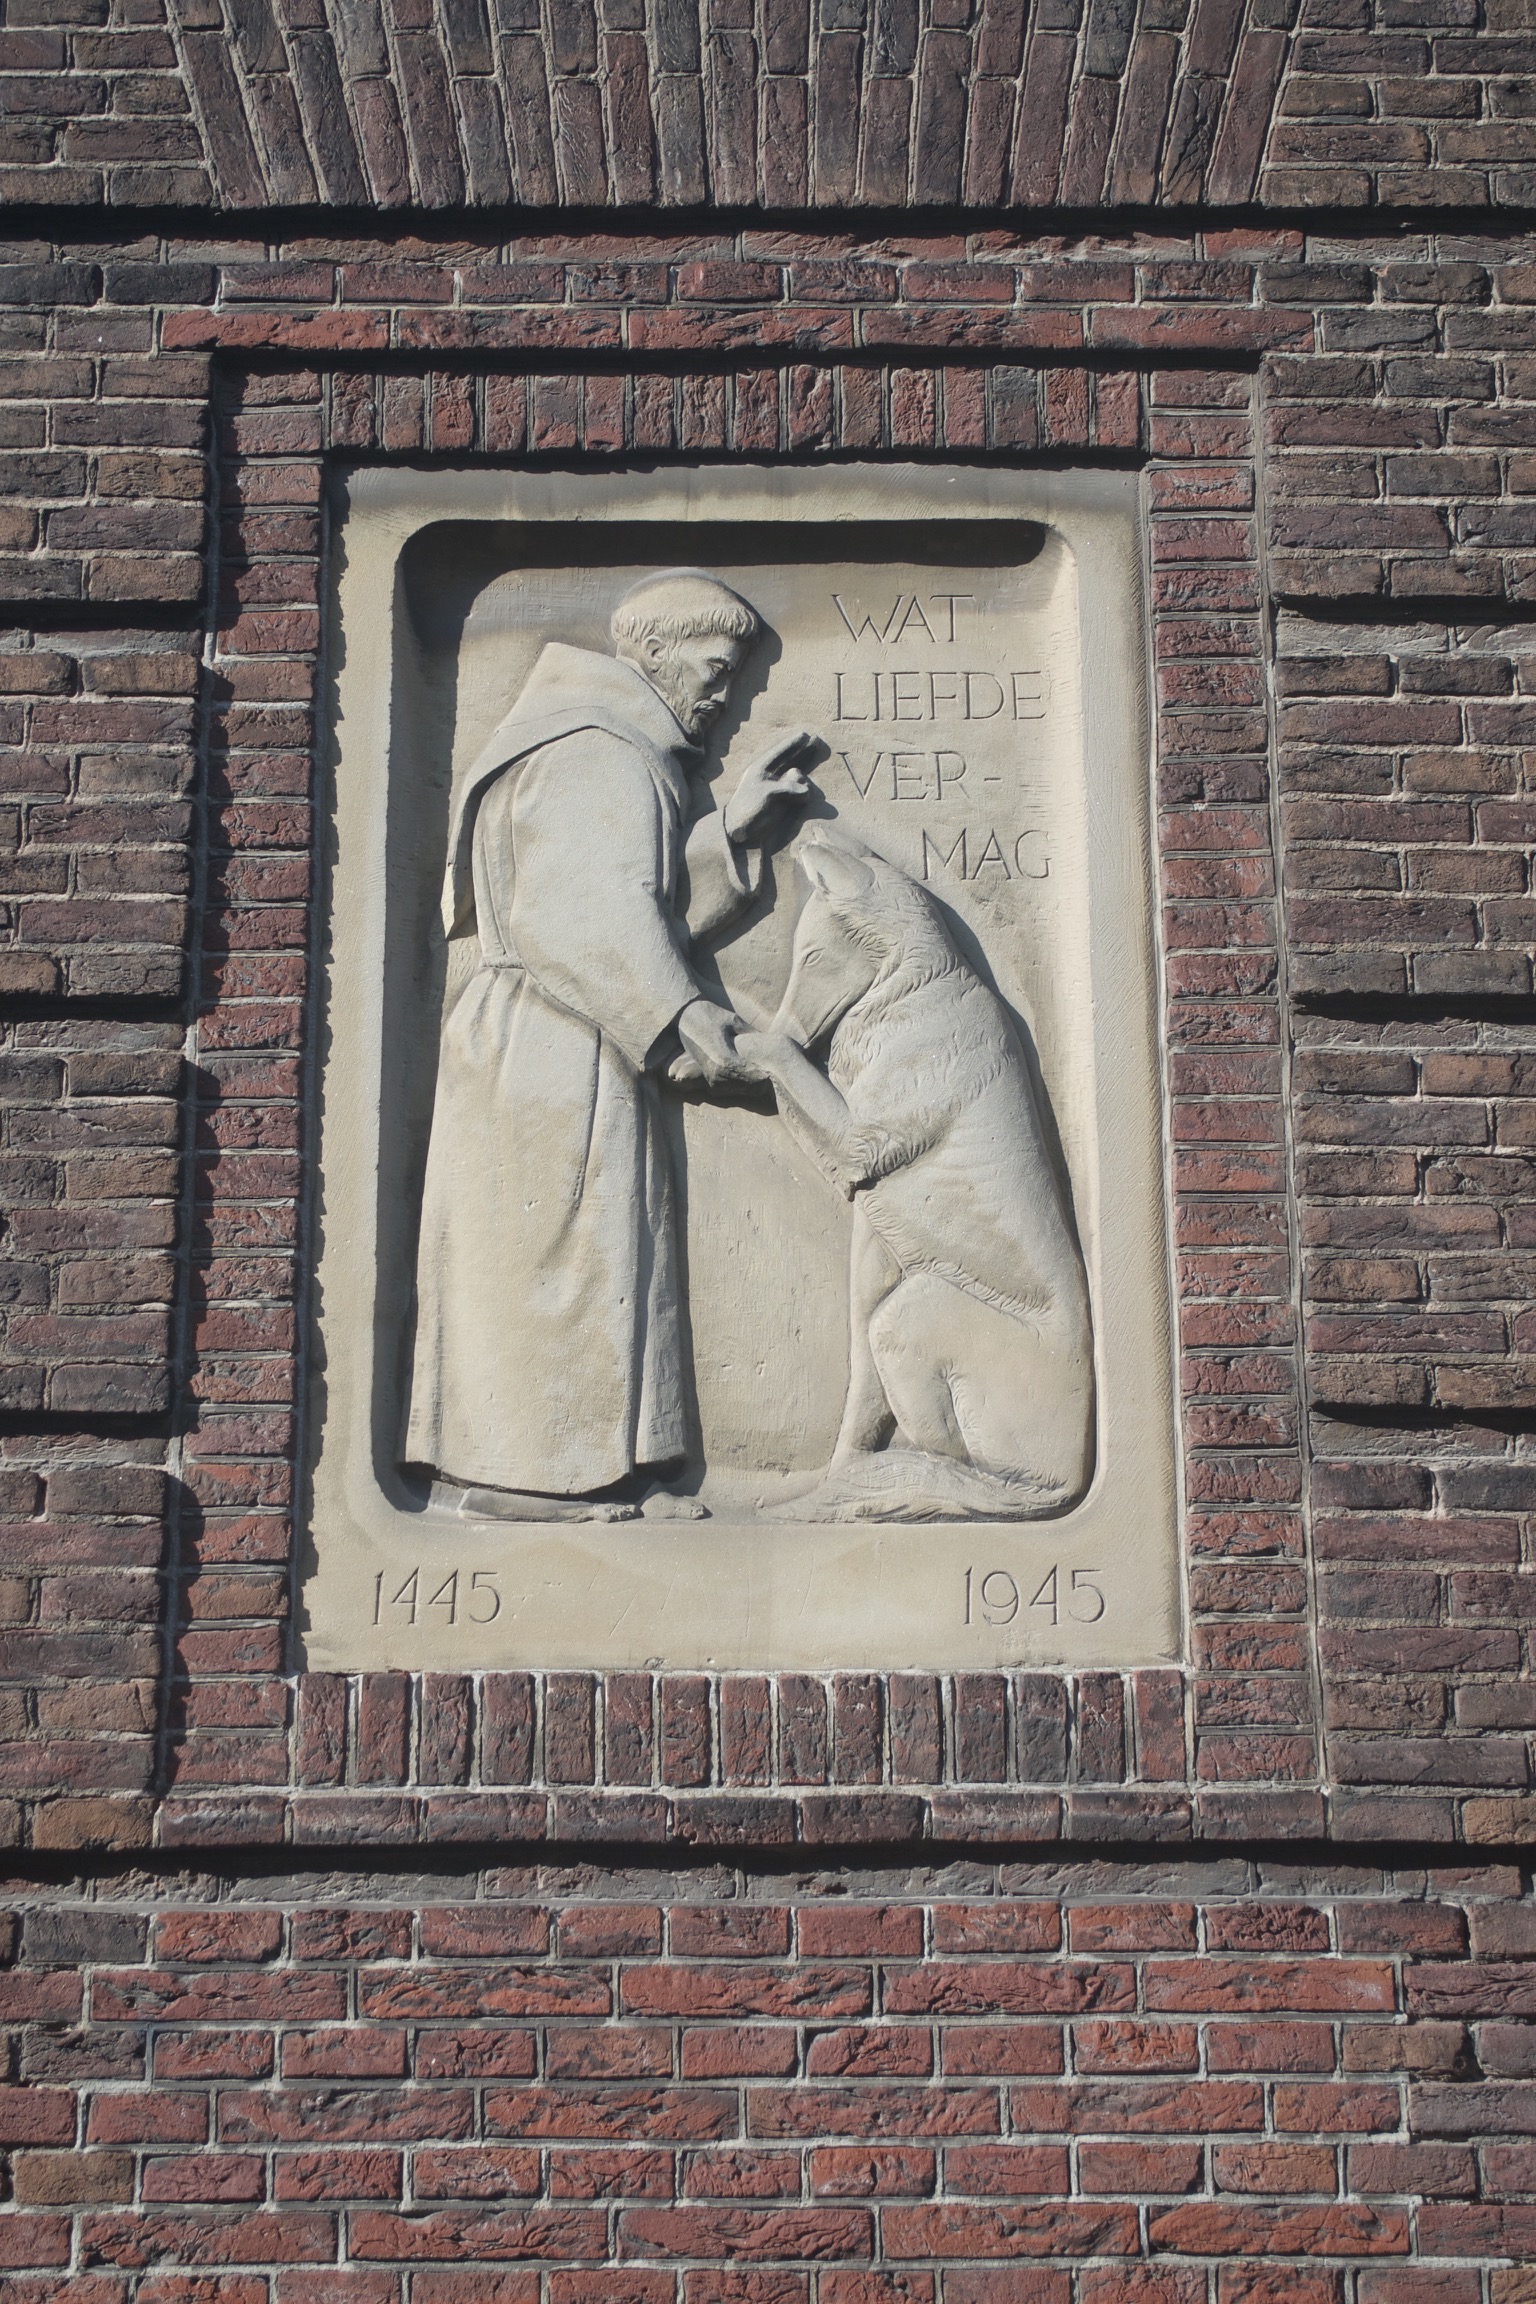 A carving of a monk blessing a dog, inscribed with the dates 1445 and 1945 in the bottom corners and 